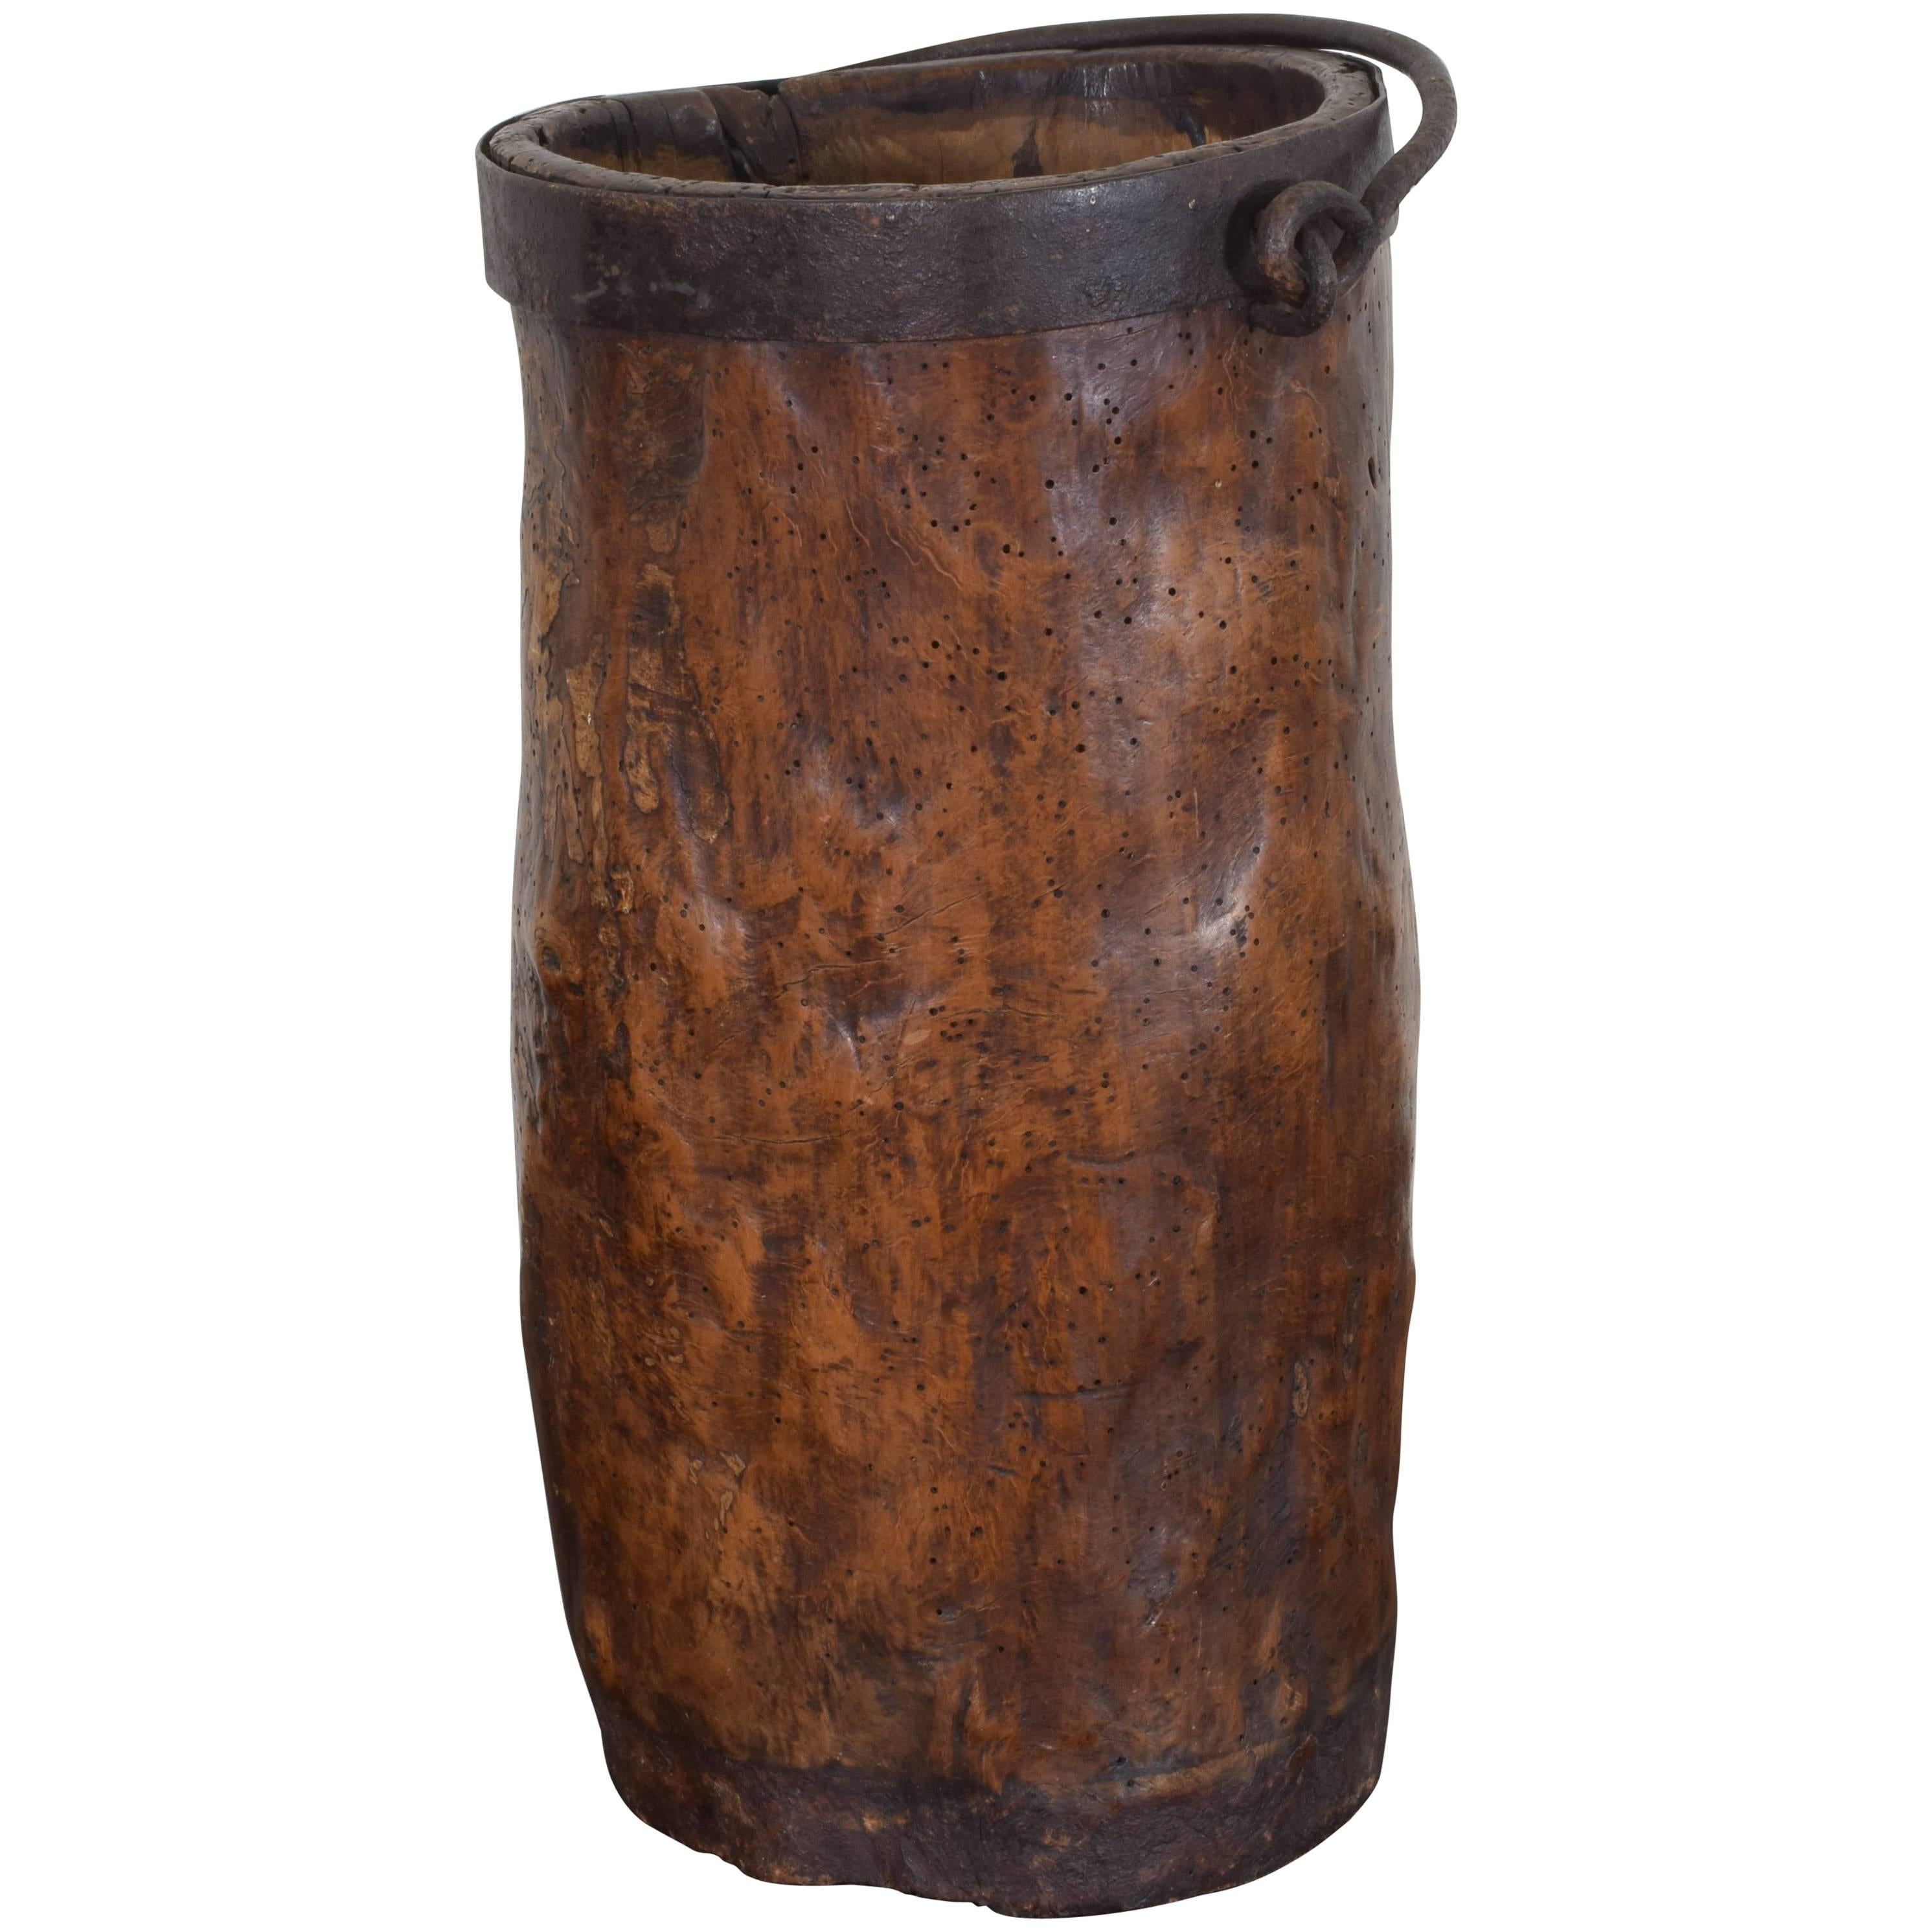 French Carved Wood and Iron Bound Handled Bucket, 18th-19th Century